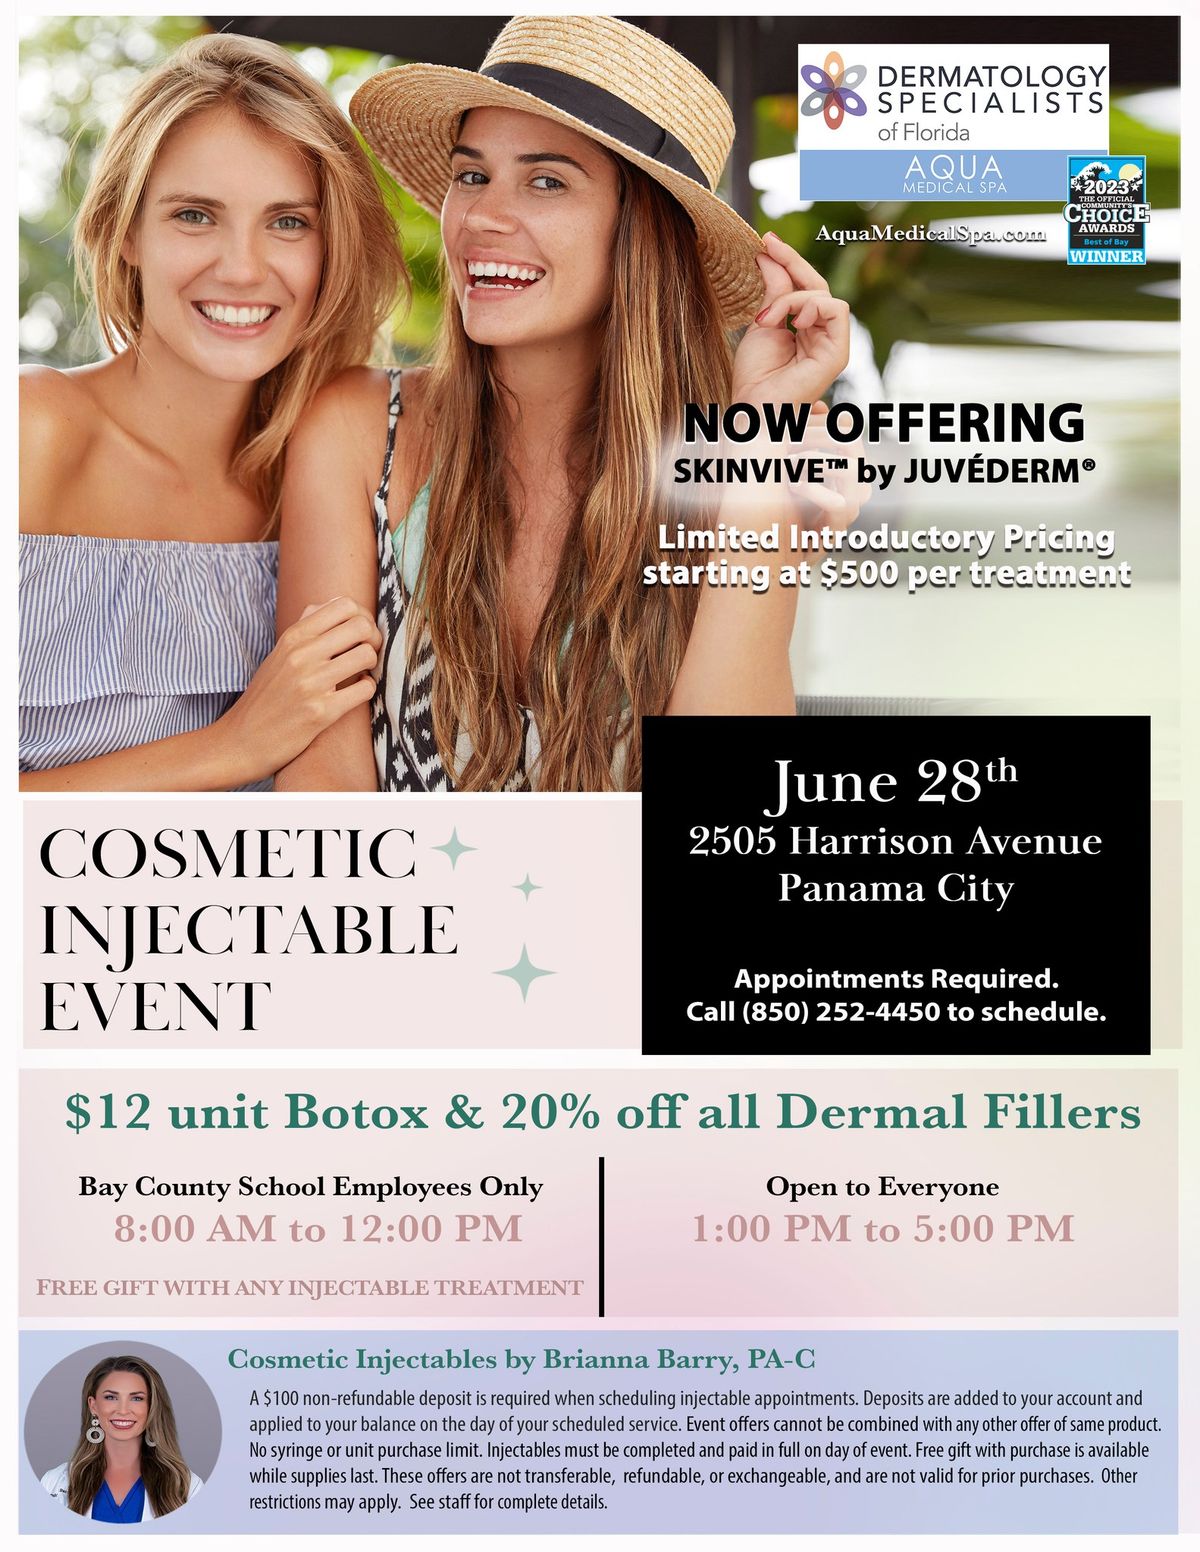 Cosmetic Injectable Event - Panama City